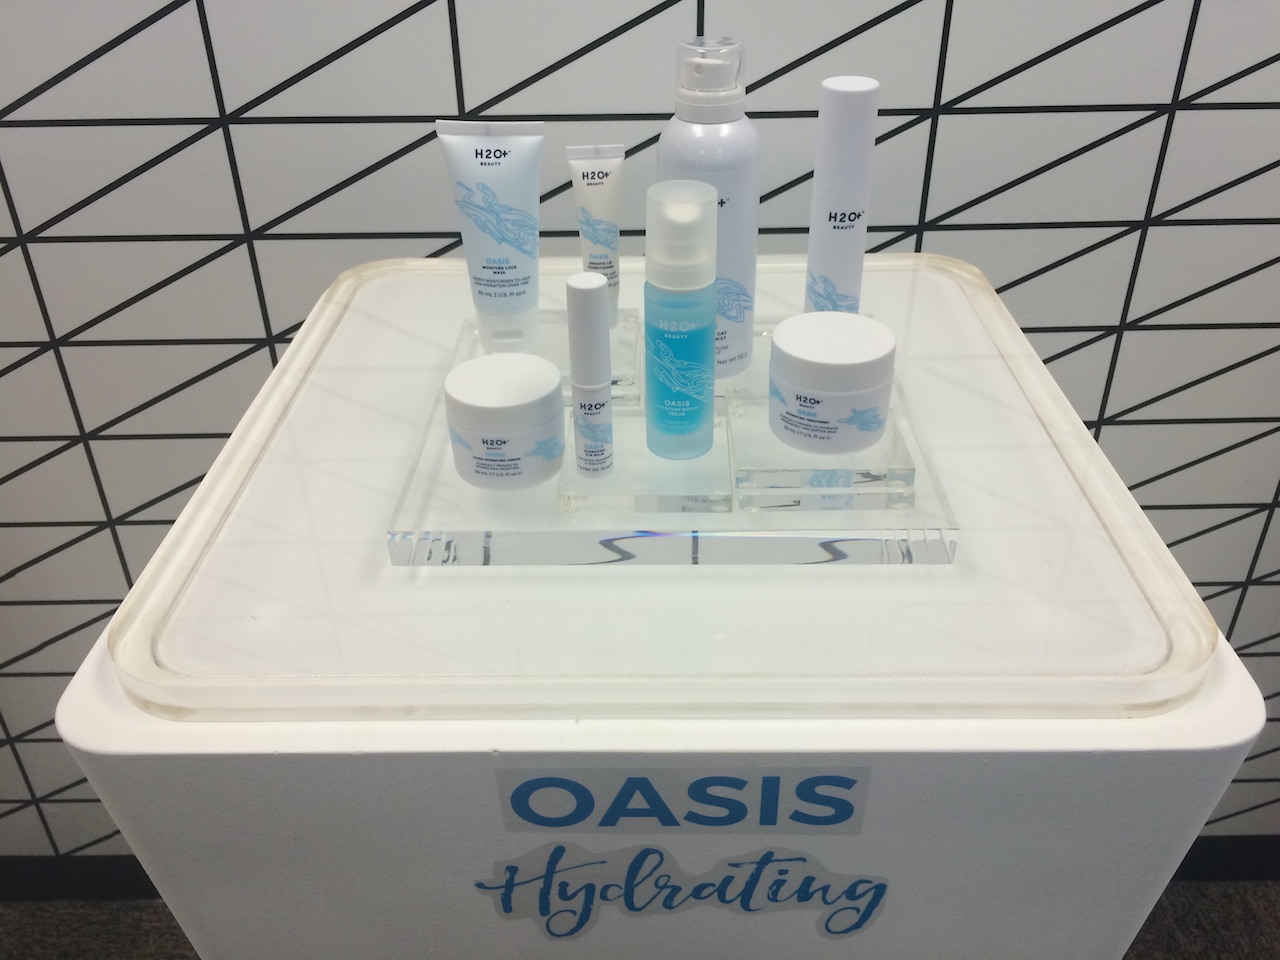 Oasis range for hydrating